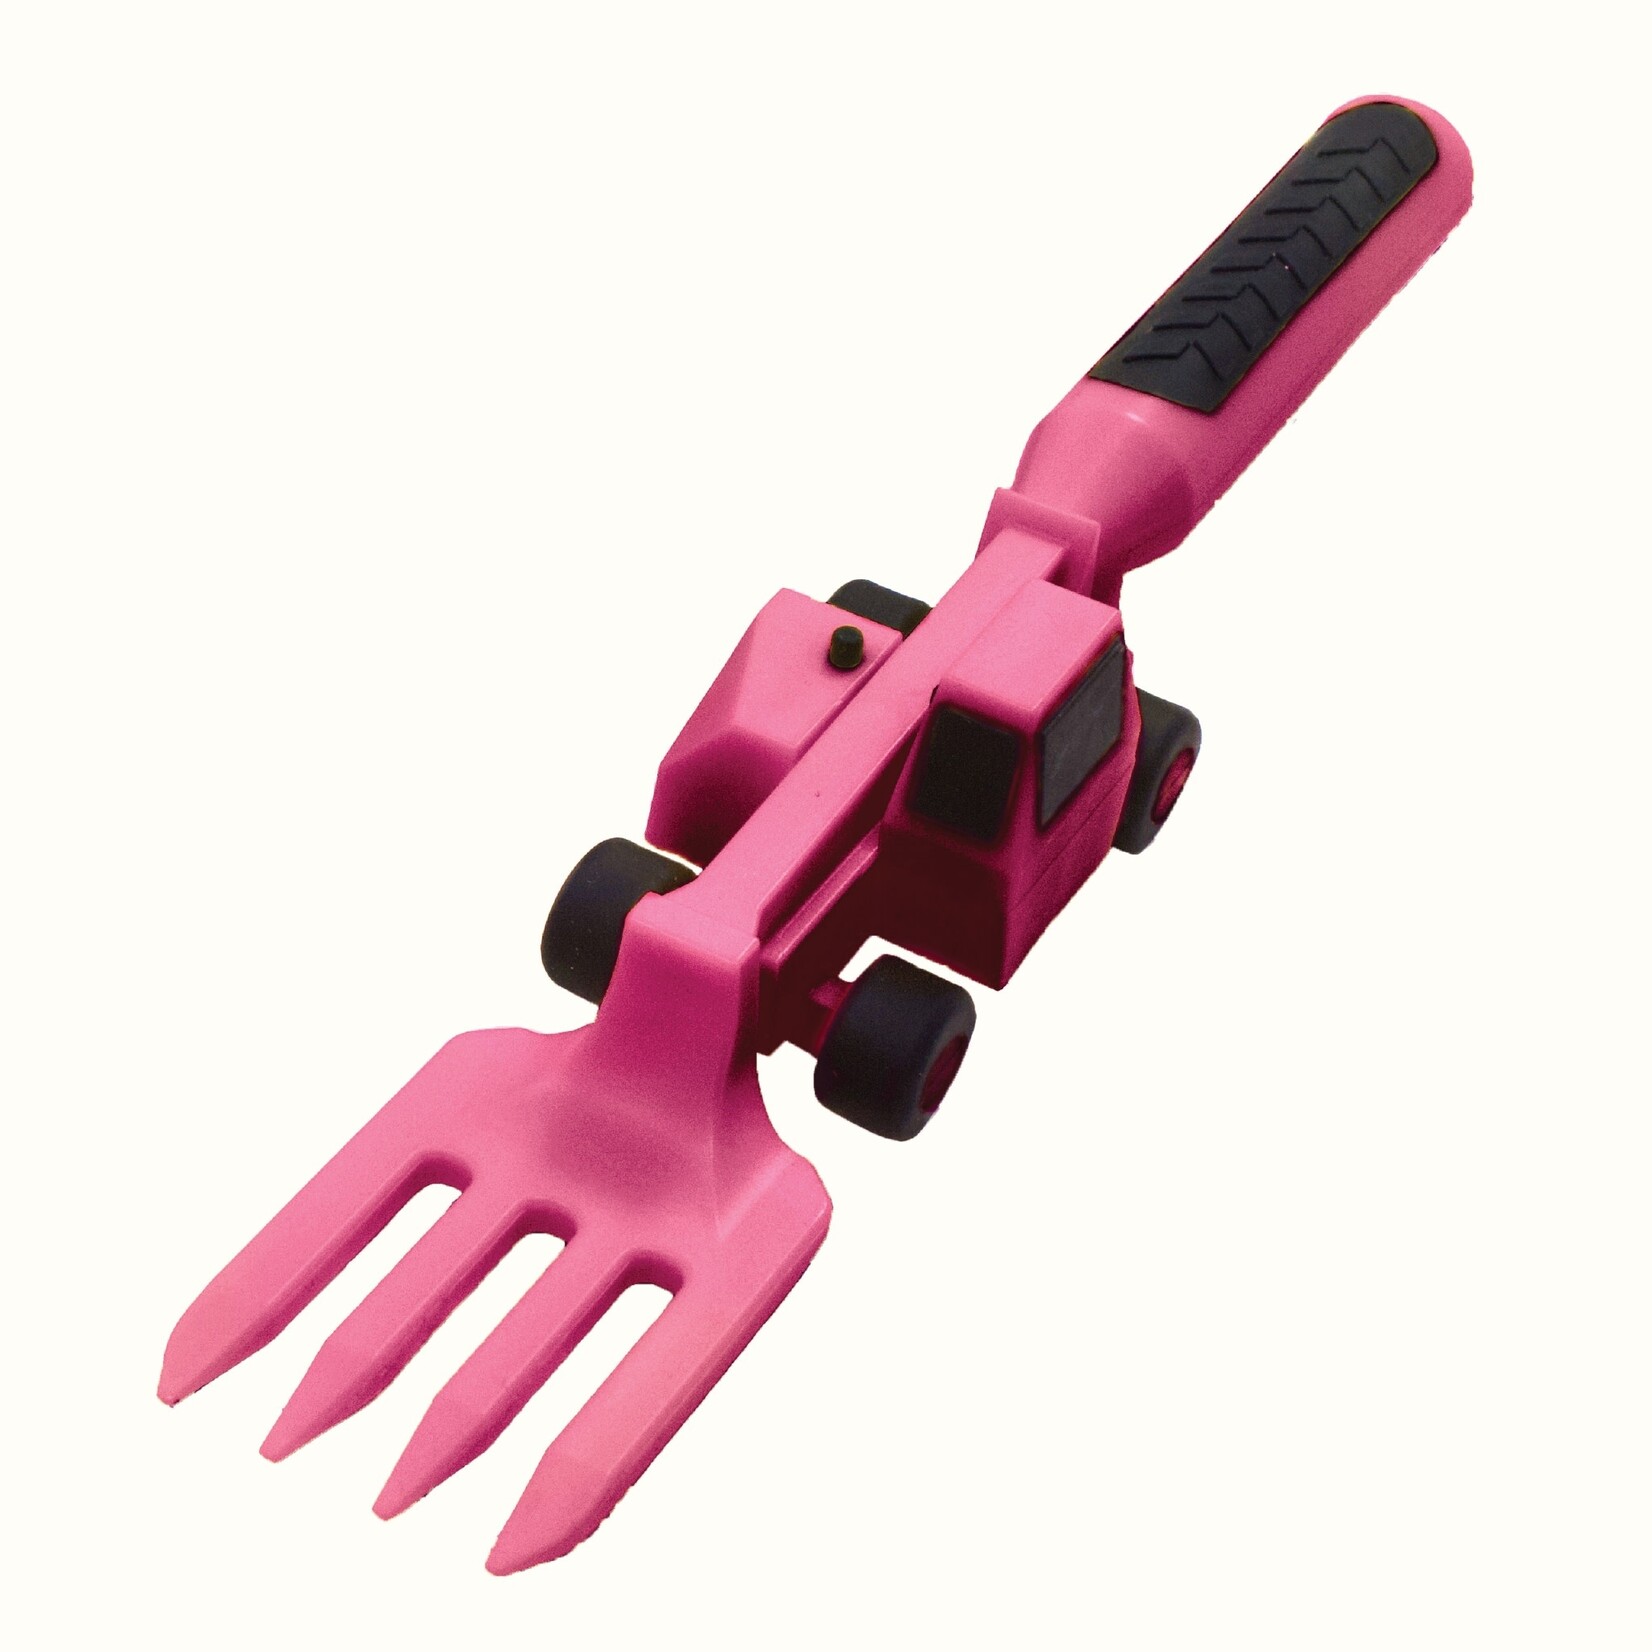 Constructive Eating Construction Fork Pink